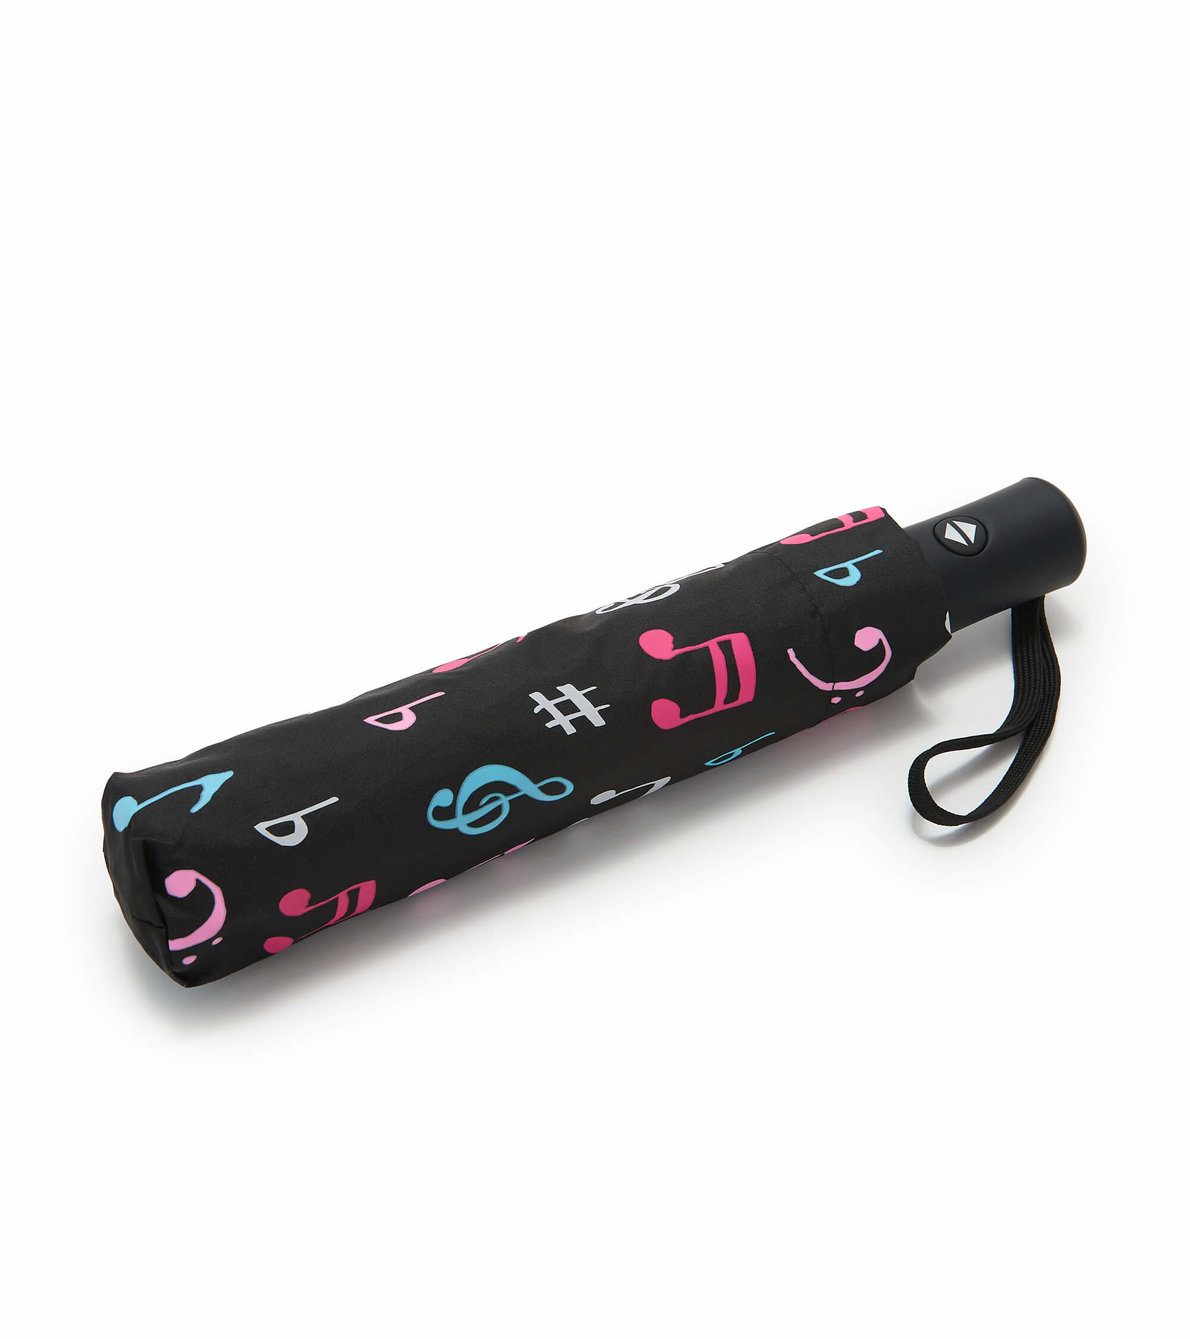 View larger image of Music Notes Adult Colour Changing Folding Umbrella